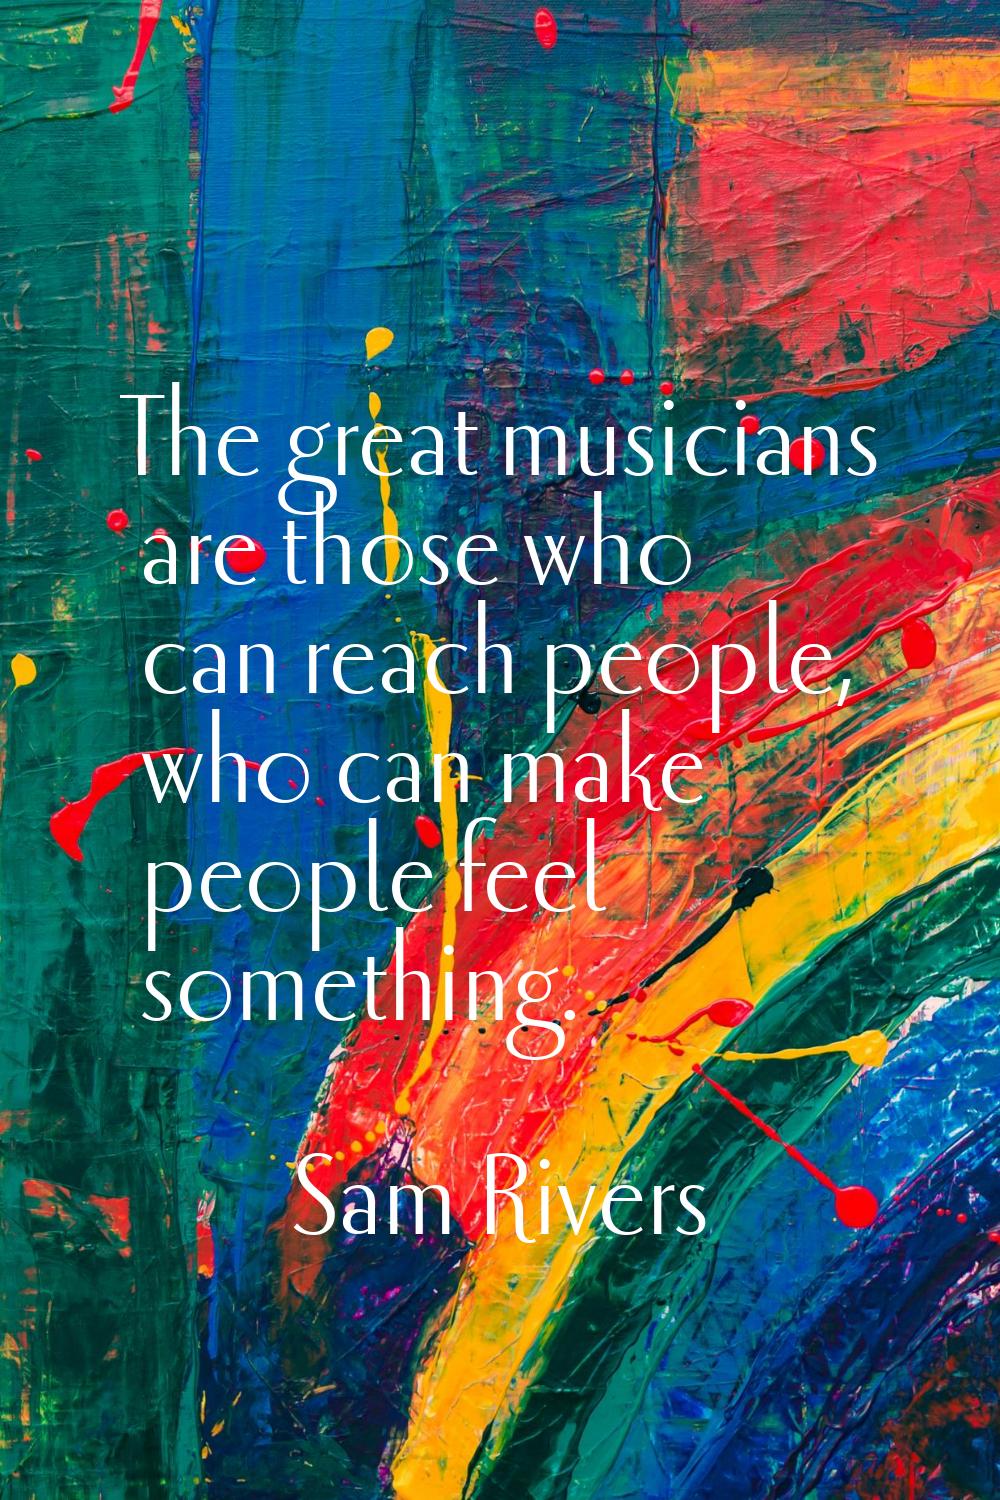 The great musicians are those who can reach people, who can make people feel something.